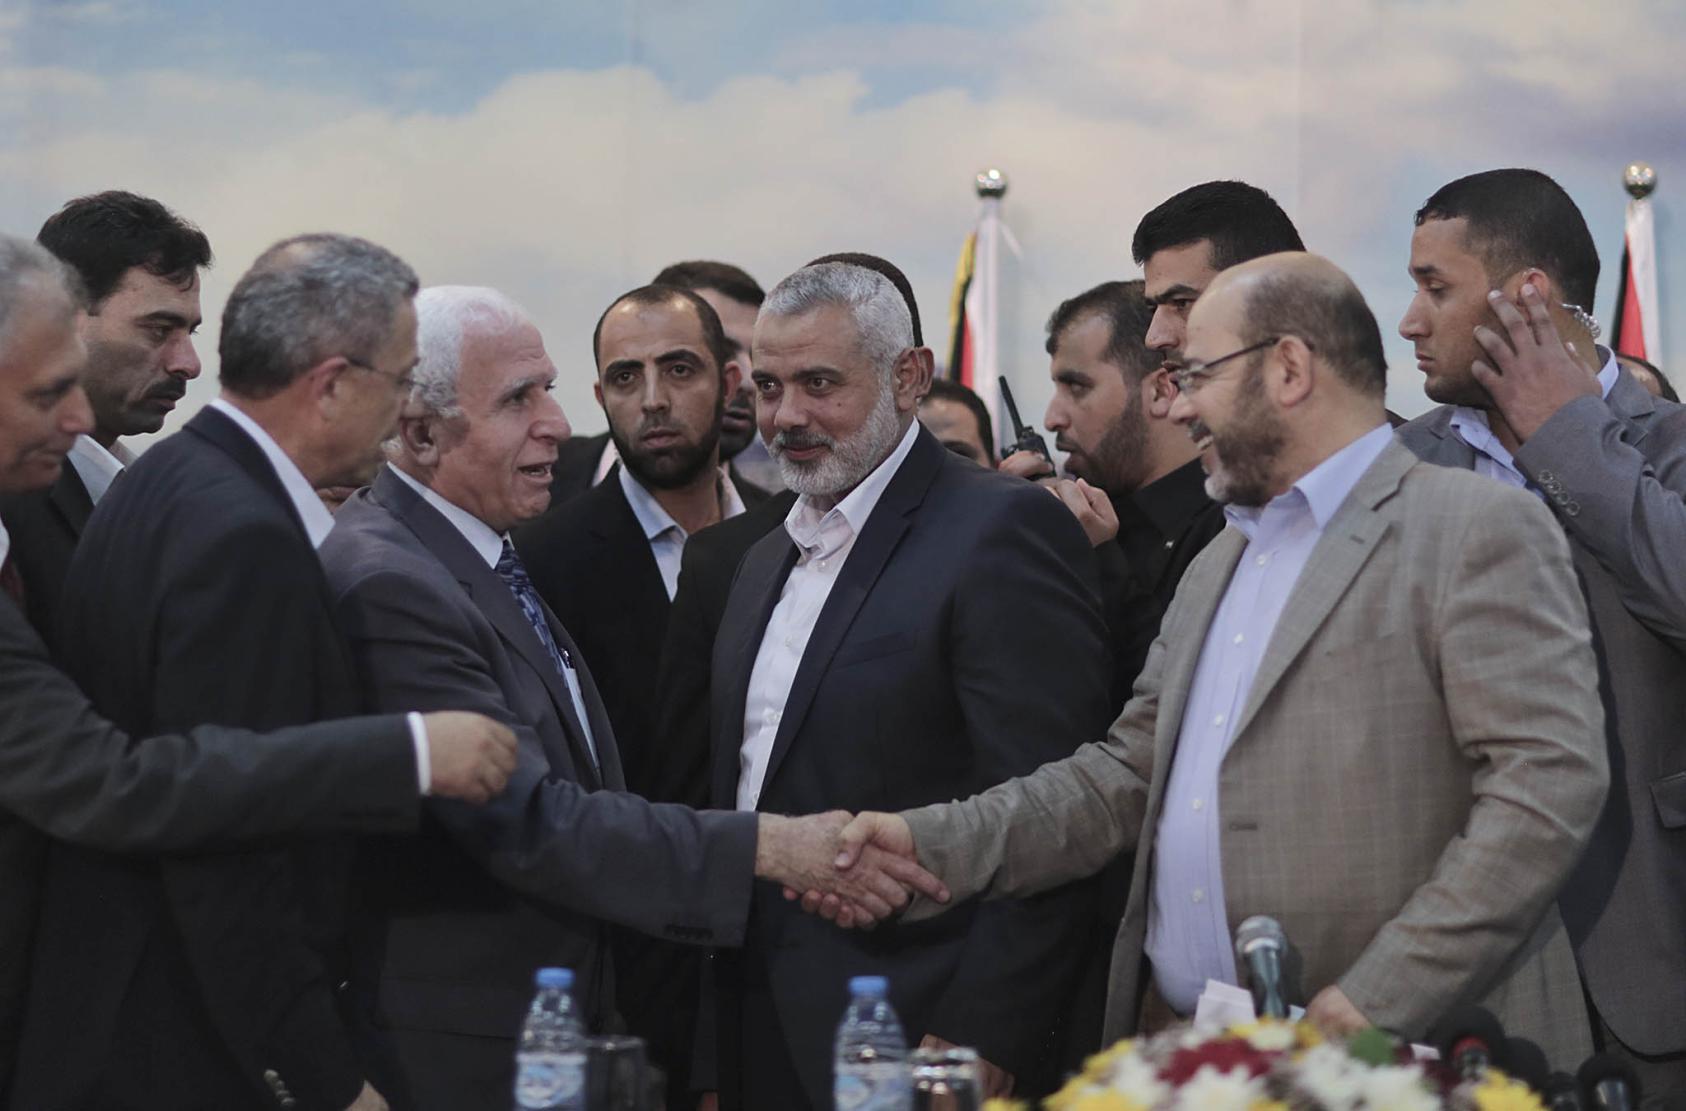 Senior Hamas and Fatah officials after they announced an agreement to heal what then had been a seven-year schism and form a unity government, in Gaza City, April 23, 2014. (Wissam Nassar/The New York Times)